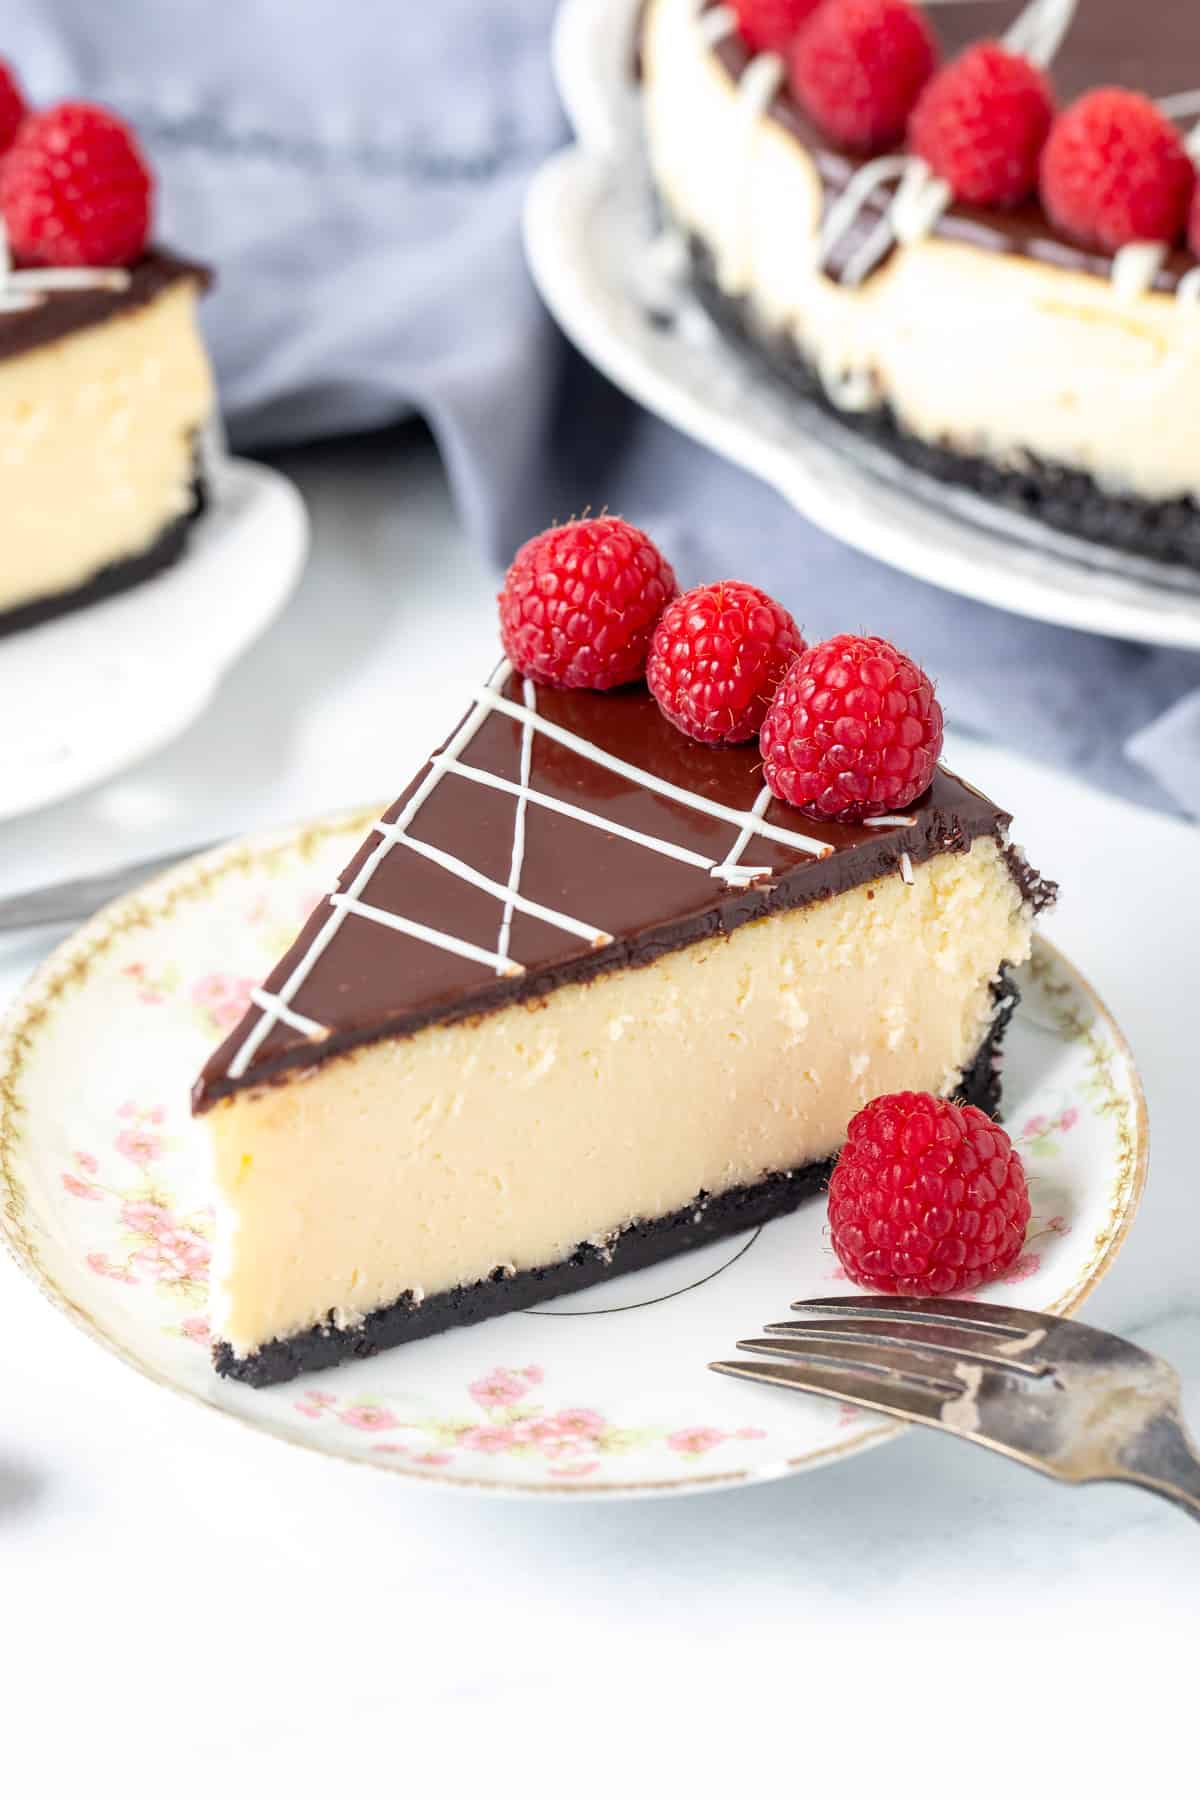 Piece of white chocolate cheesecake, topped with chocolate ganache & decorated with raspberries